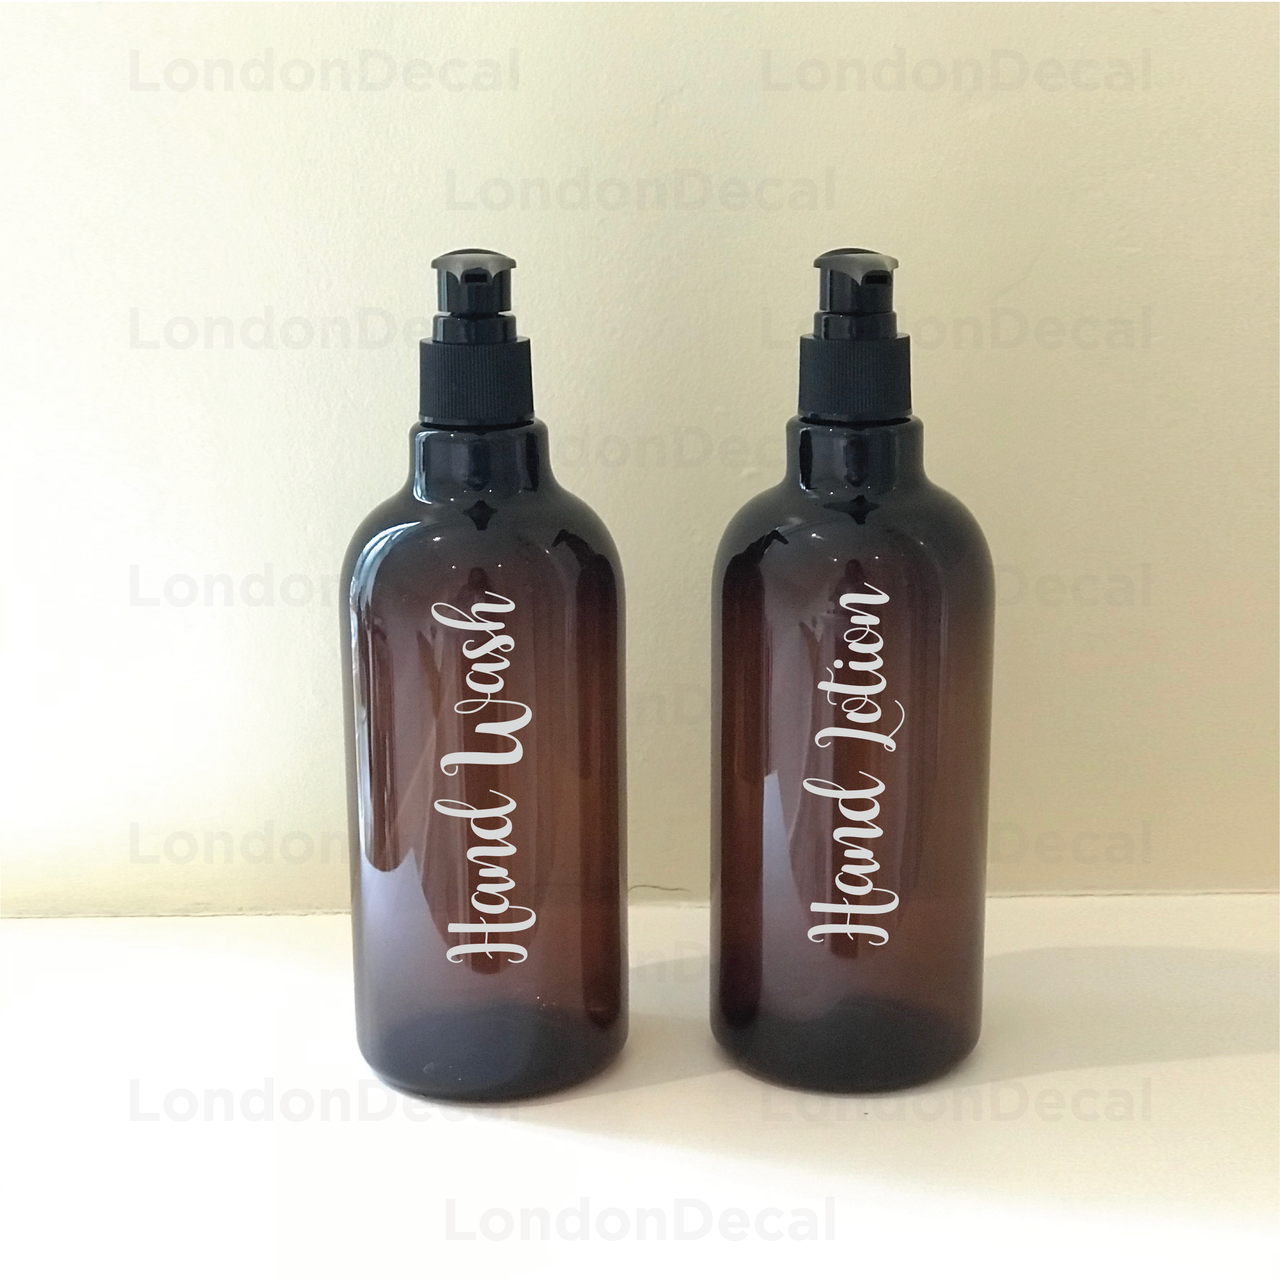 HAND WASH and HAND LOTION - Mrs Hinch inspired bottle decal stickers (Type 3)